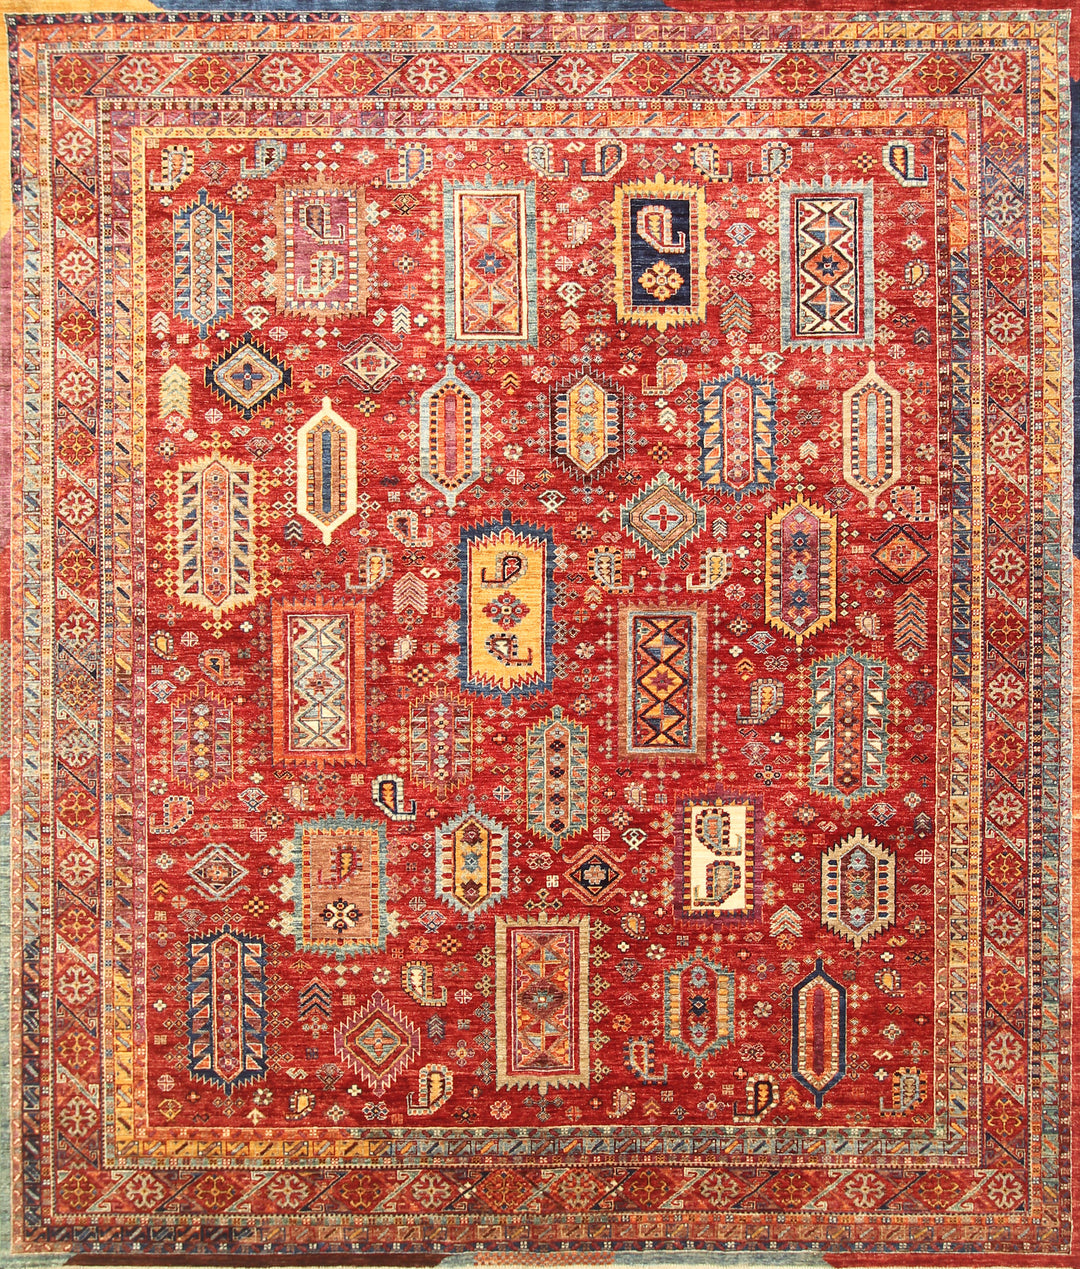 Red 8x10 Tribal Afghan Samarkand Baluch Hand knotted Rug - Yildiz Rugs